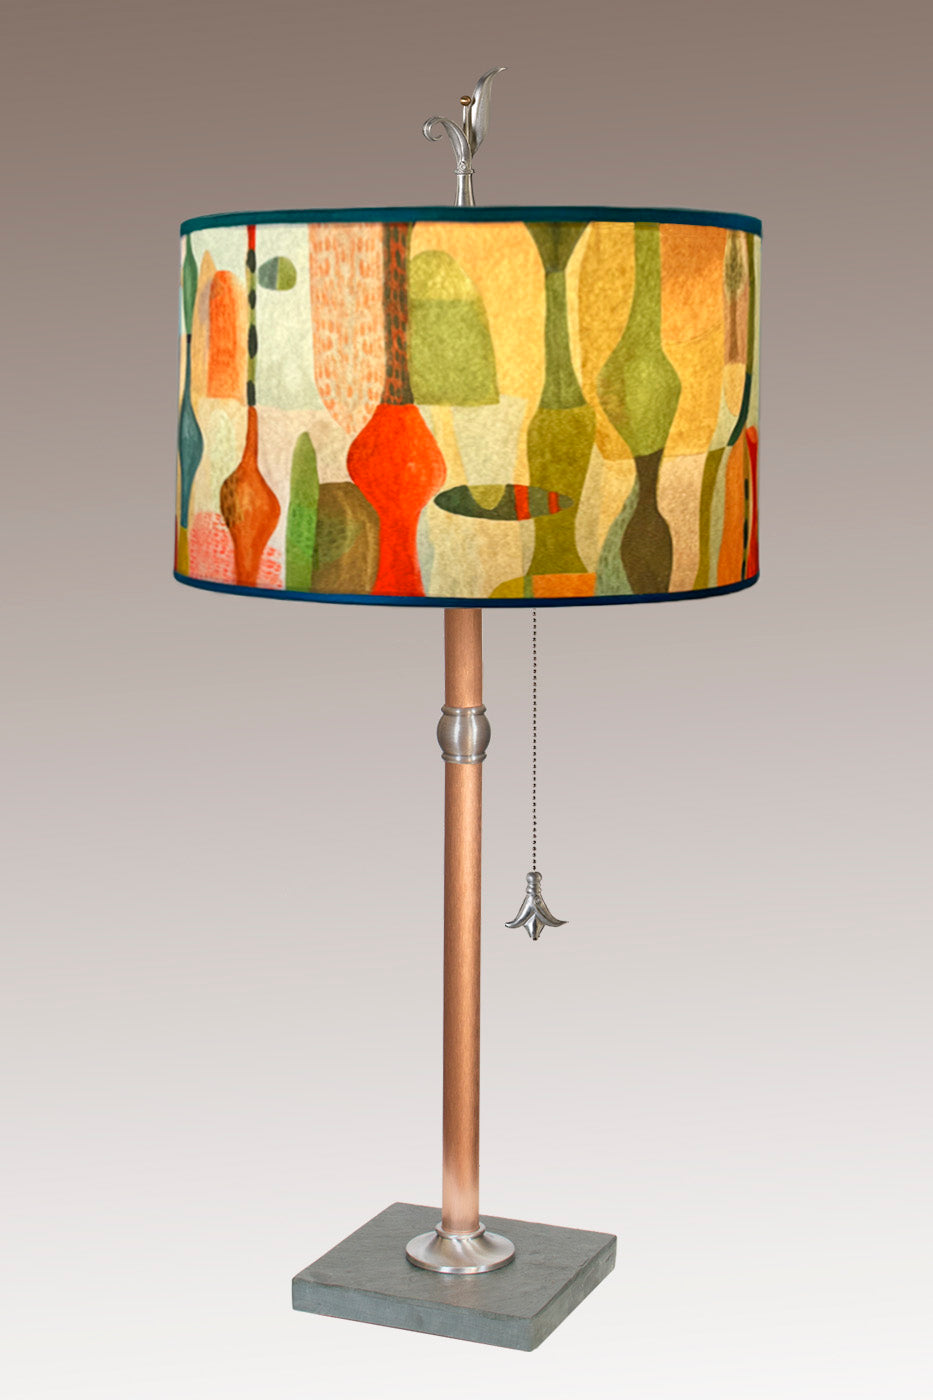 Janna Ugone & Co Table Lamp Copper Table Lamp with Large Drum Shade in Riviera in Poppy